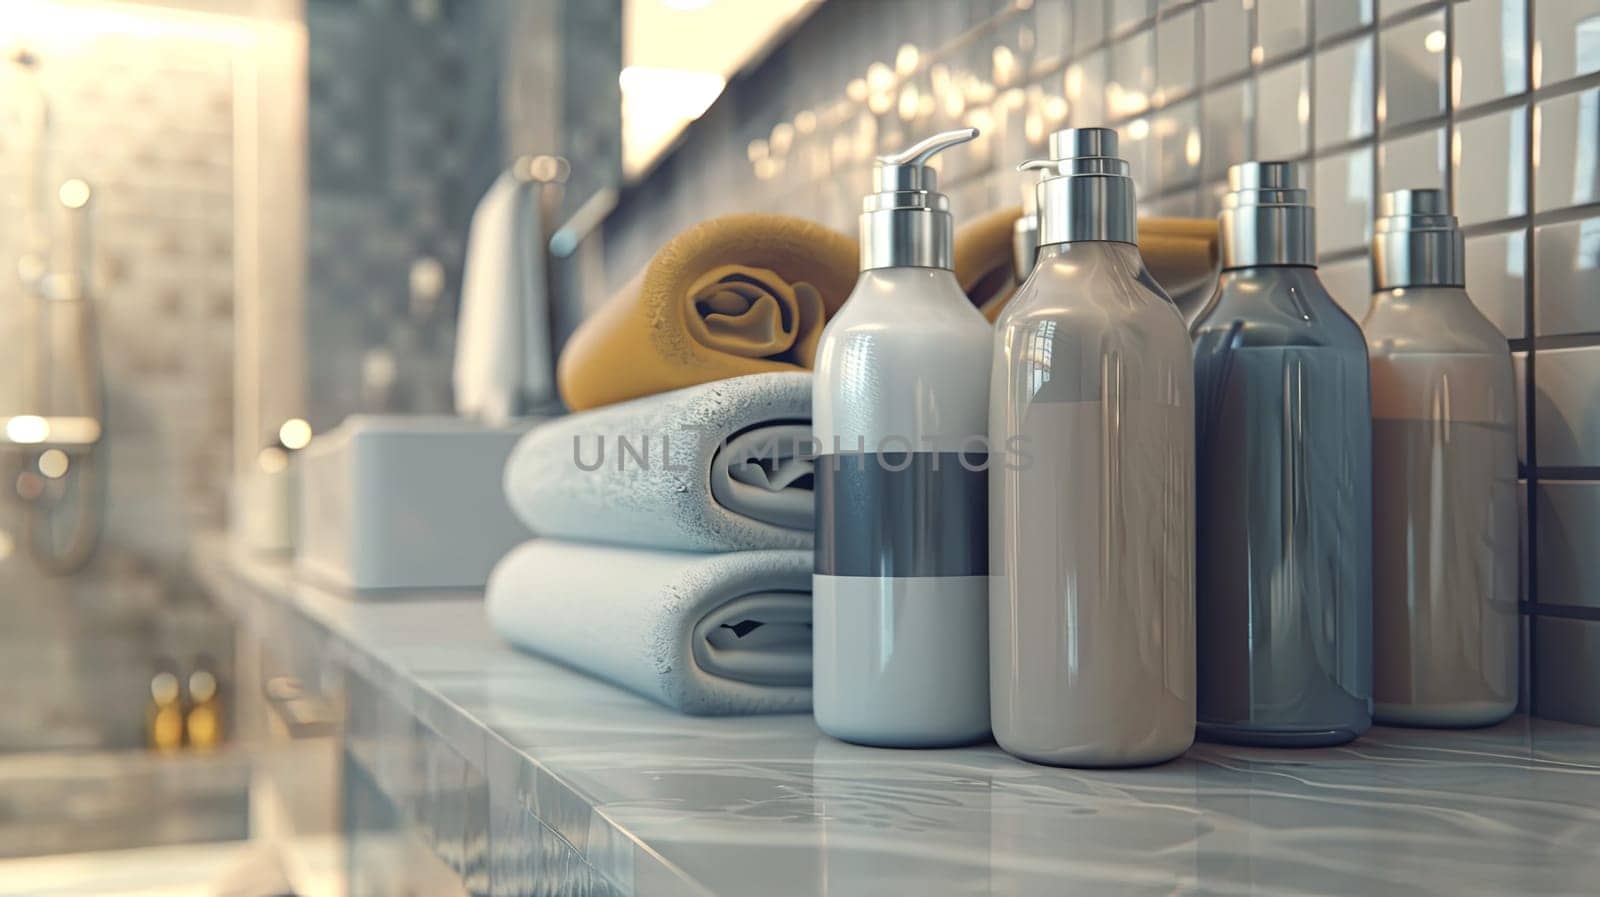 A close-up view of stylish bottles of shampoo and conditioner in a luxurious bathroom setting.